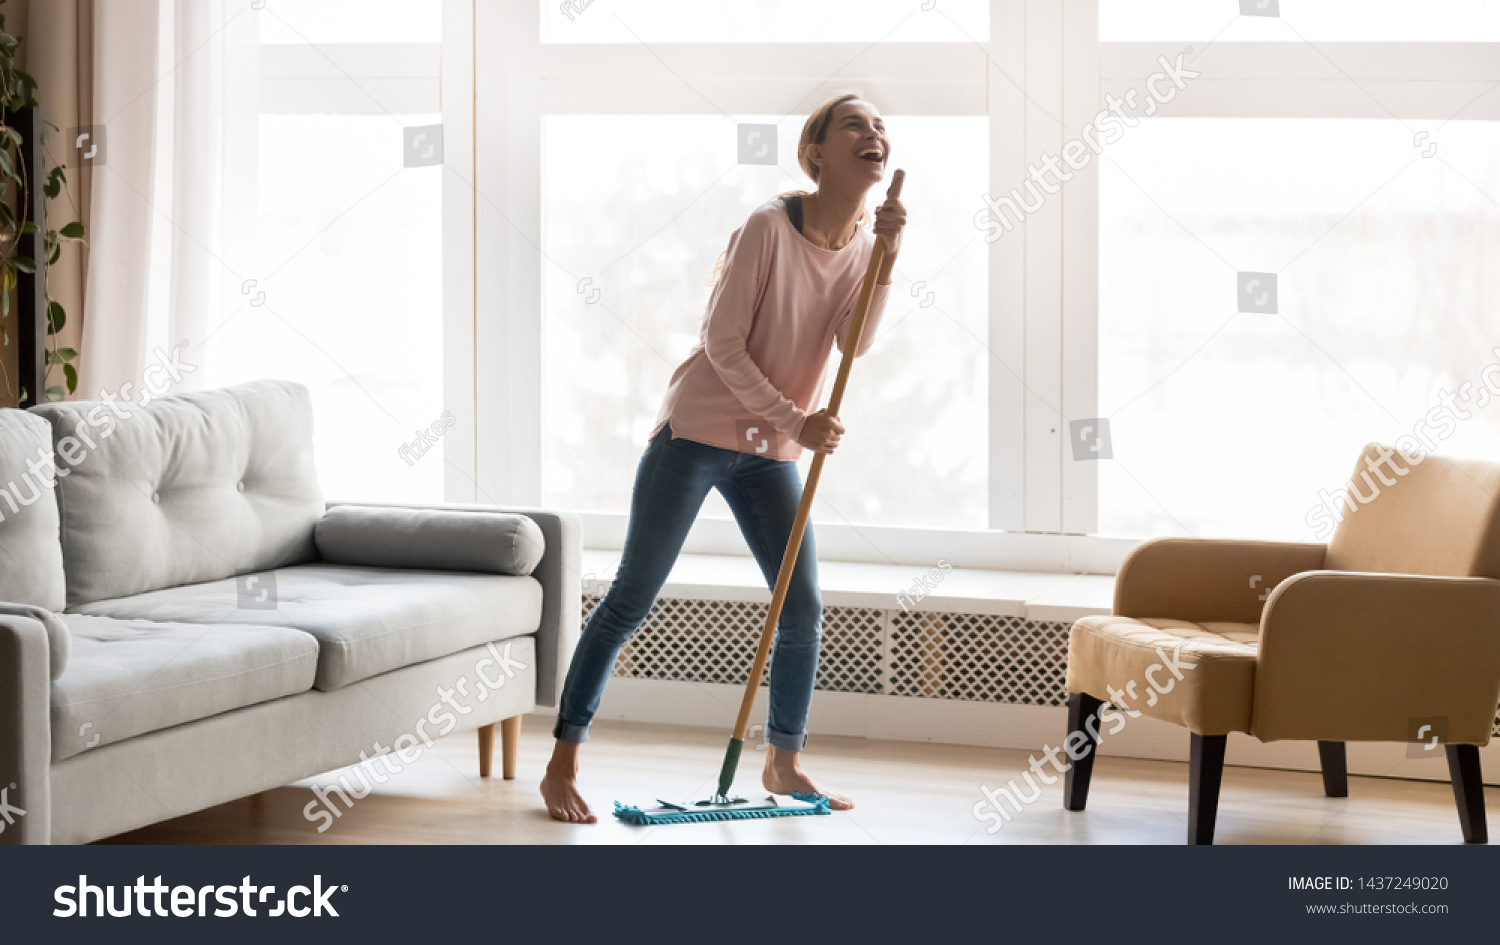 Carefree happy young woman cleaning house living room have fun dancing with mop, smiling overjoyed millennial girl feel excited enjoy making home chores sing entertain using floor broom or Swiffer #1437249020